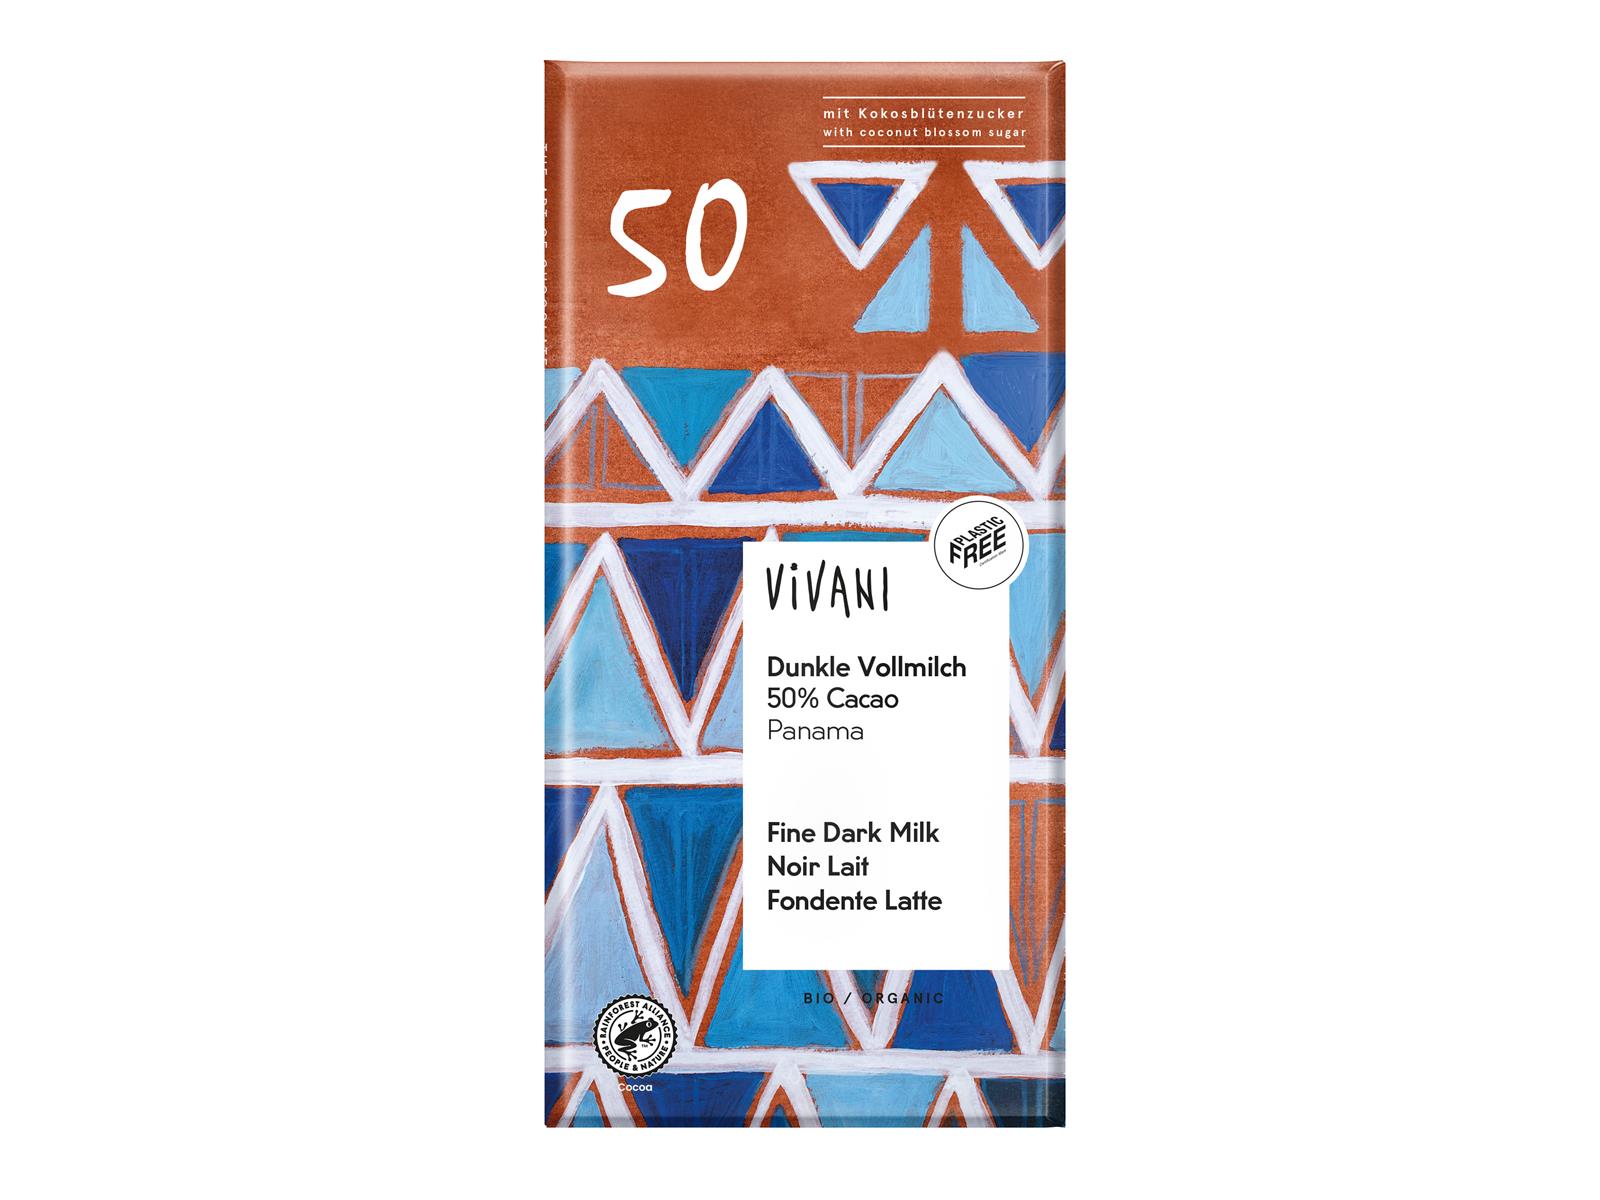 Vivani Dunkle Vollmilch 50% Cacao Panama 80 g